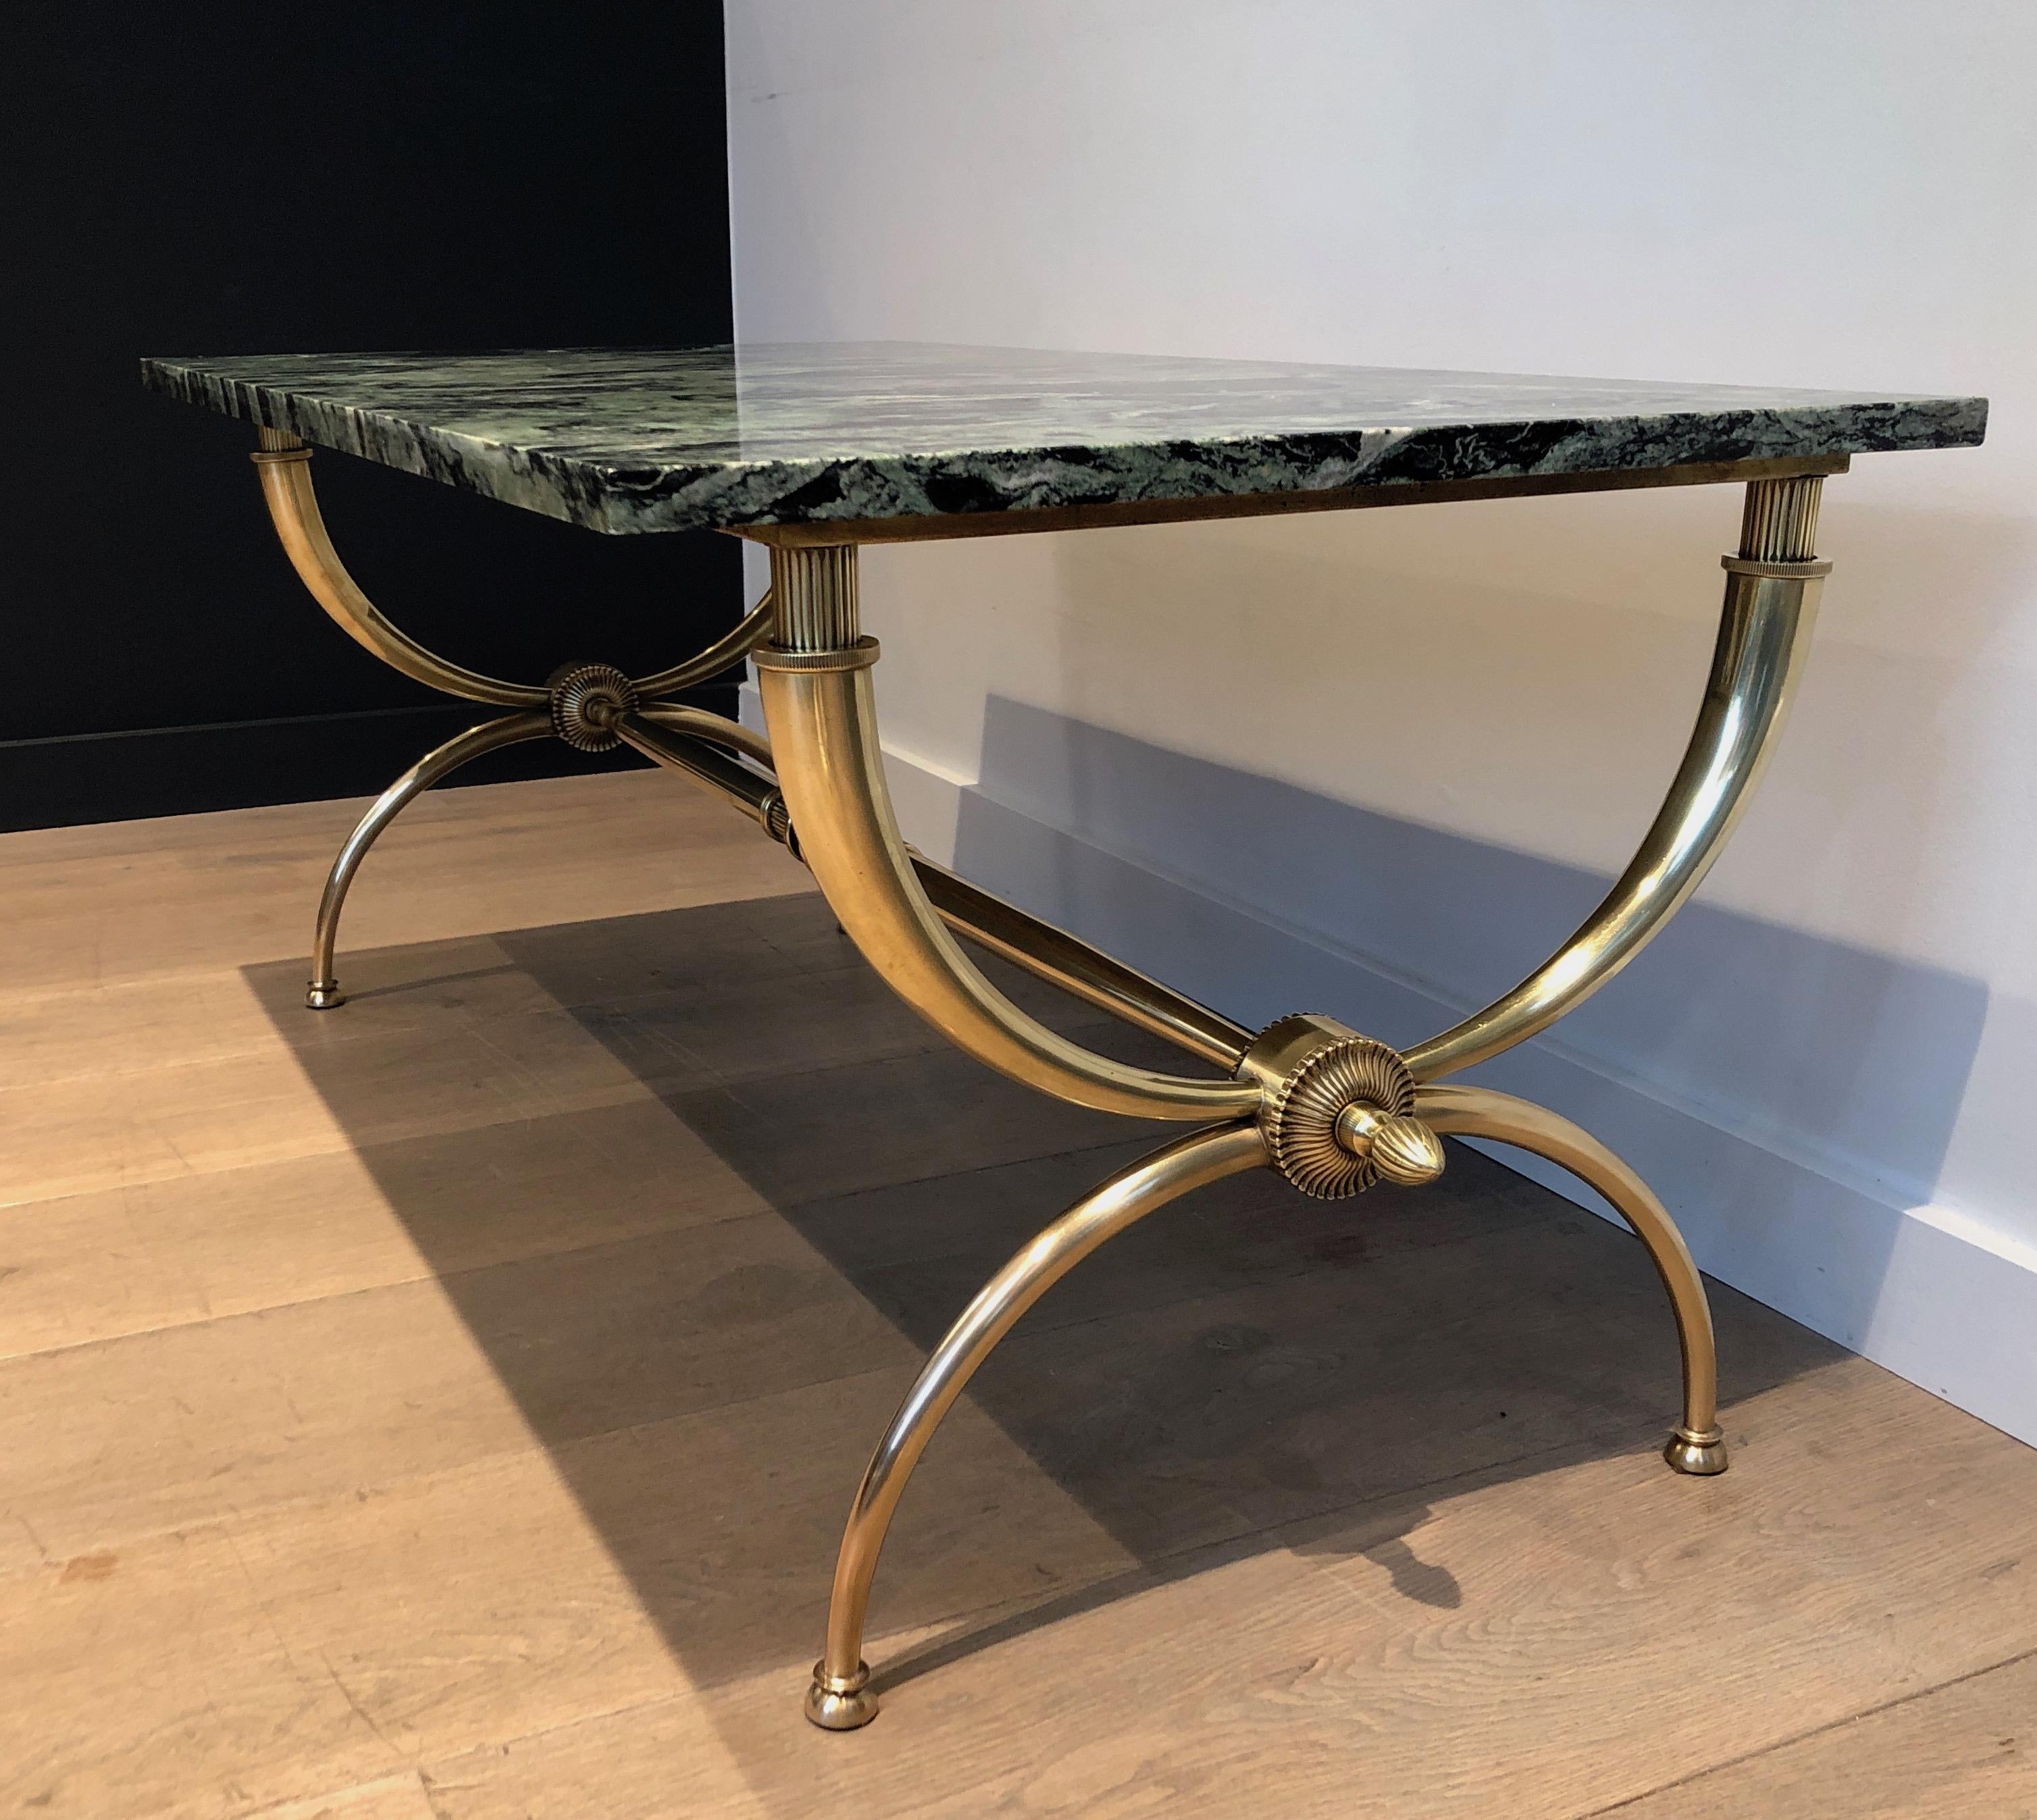 Mid-20th Century Raymond Subes Brass Coffee Table with Green Marble Top, French by Raymond Subes